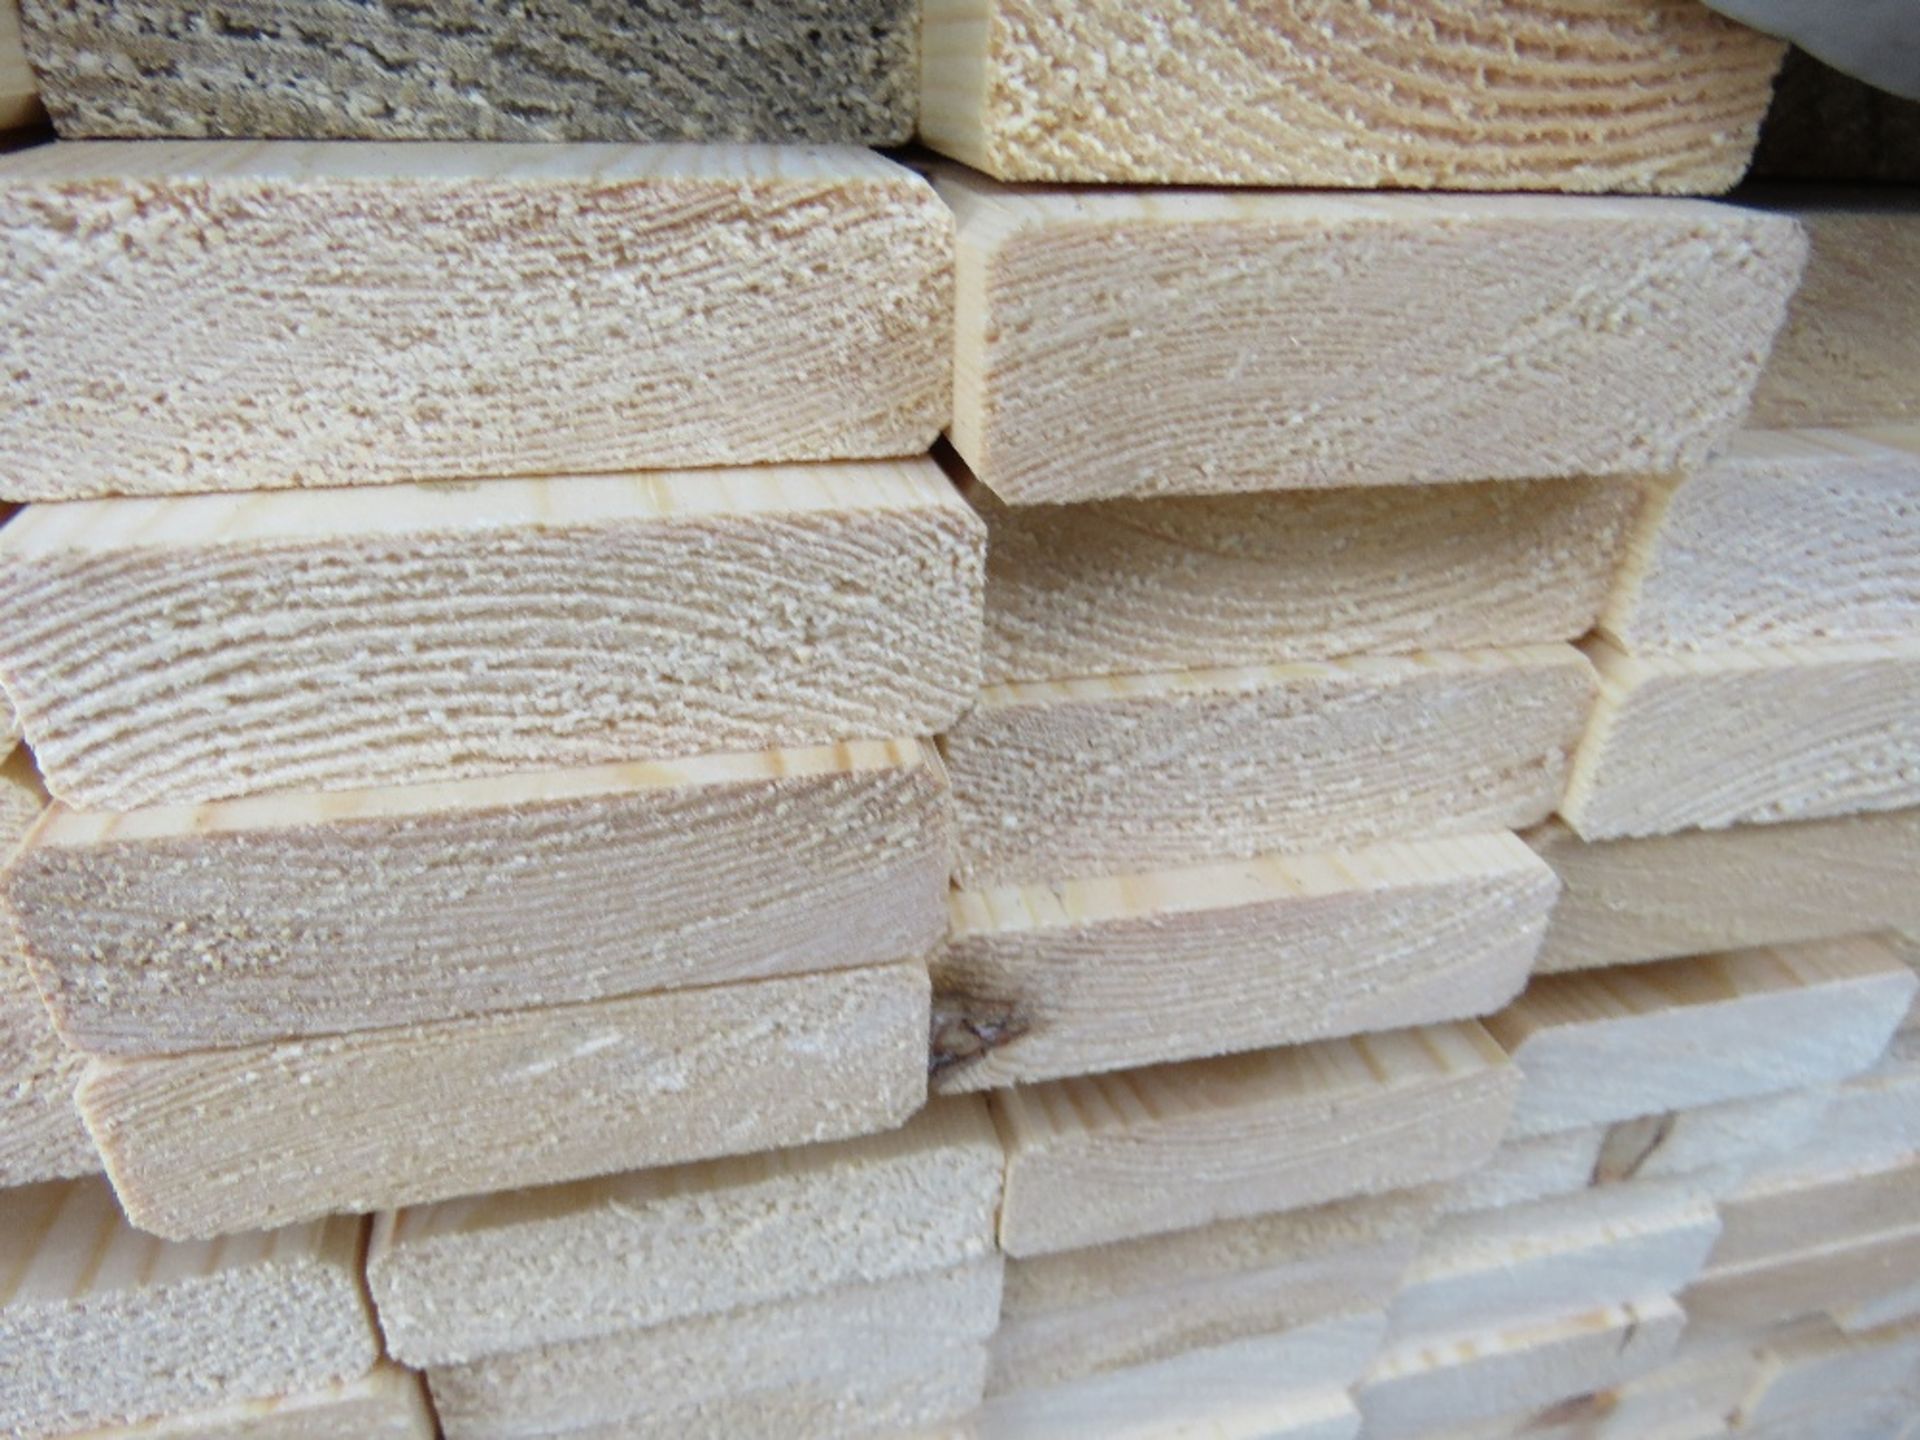 LARGE PACK OF UNTREATED TIMBER SLATS 1.83M X 70MM X 20MM APPROX. - Image 3 of 3